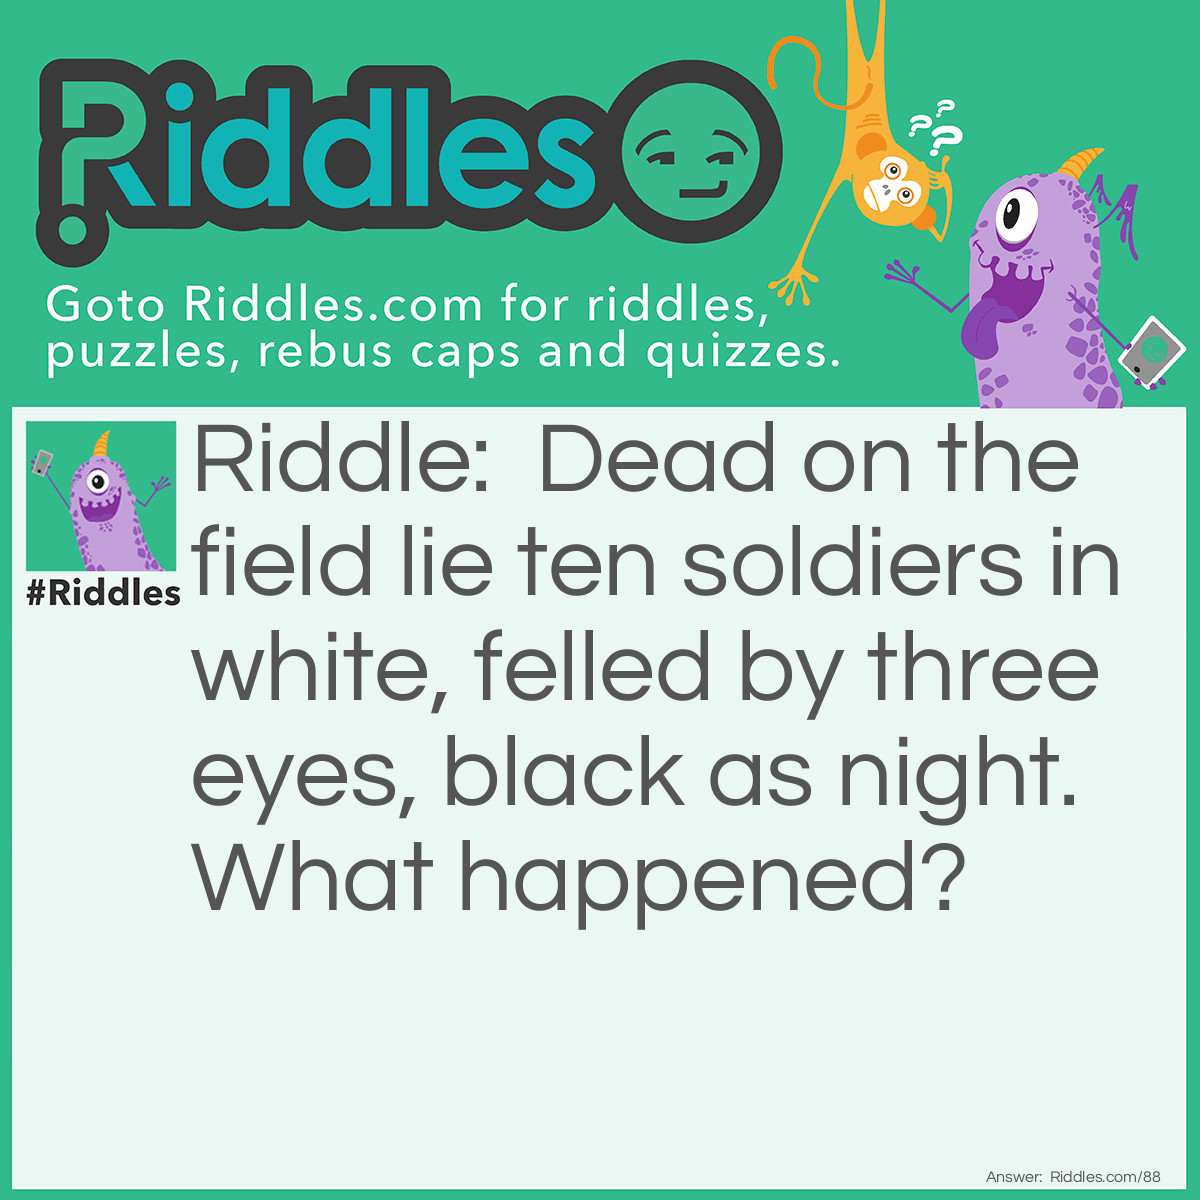 Riddle: Dead on the field lie ten soldiers in white, felled by three eyes, black as night. What happened? Answer: A strike was thrown in 10 pin bowling.